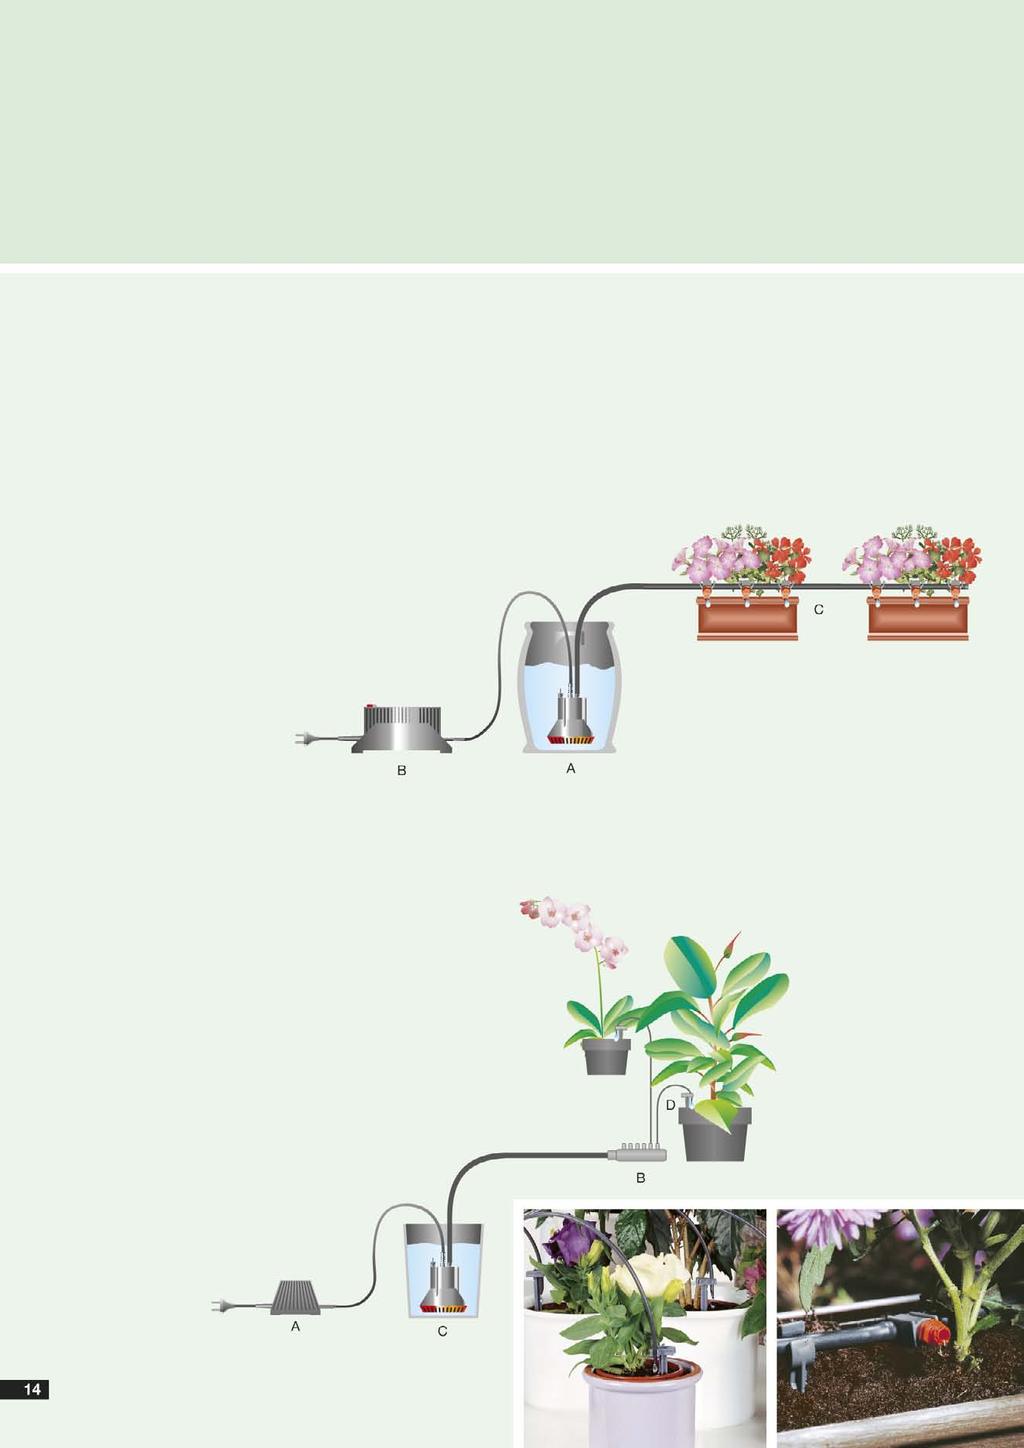 GARDENA Micro-Drip-System Watering without a tap for flower boxes and balcony planters Fully automatic flower box watering For watering up to 5-6 m of containers.